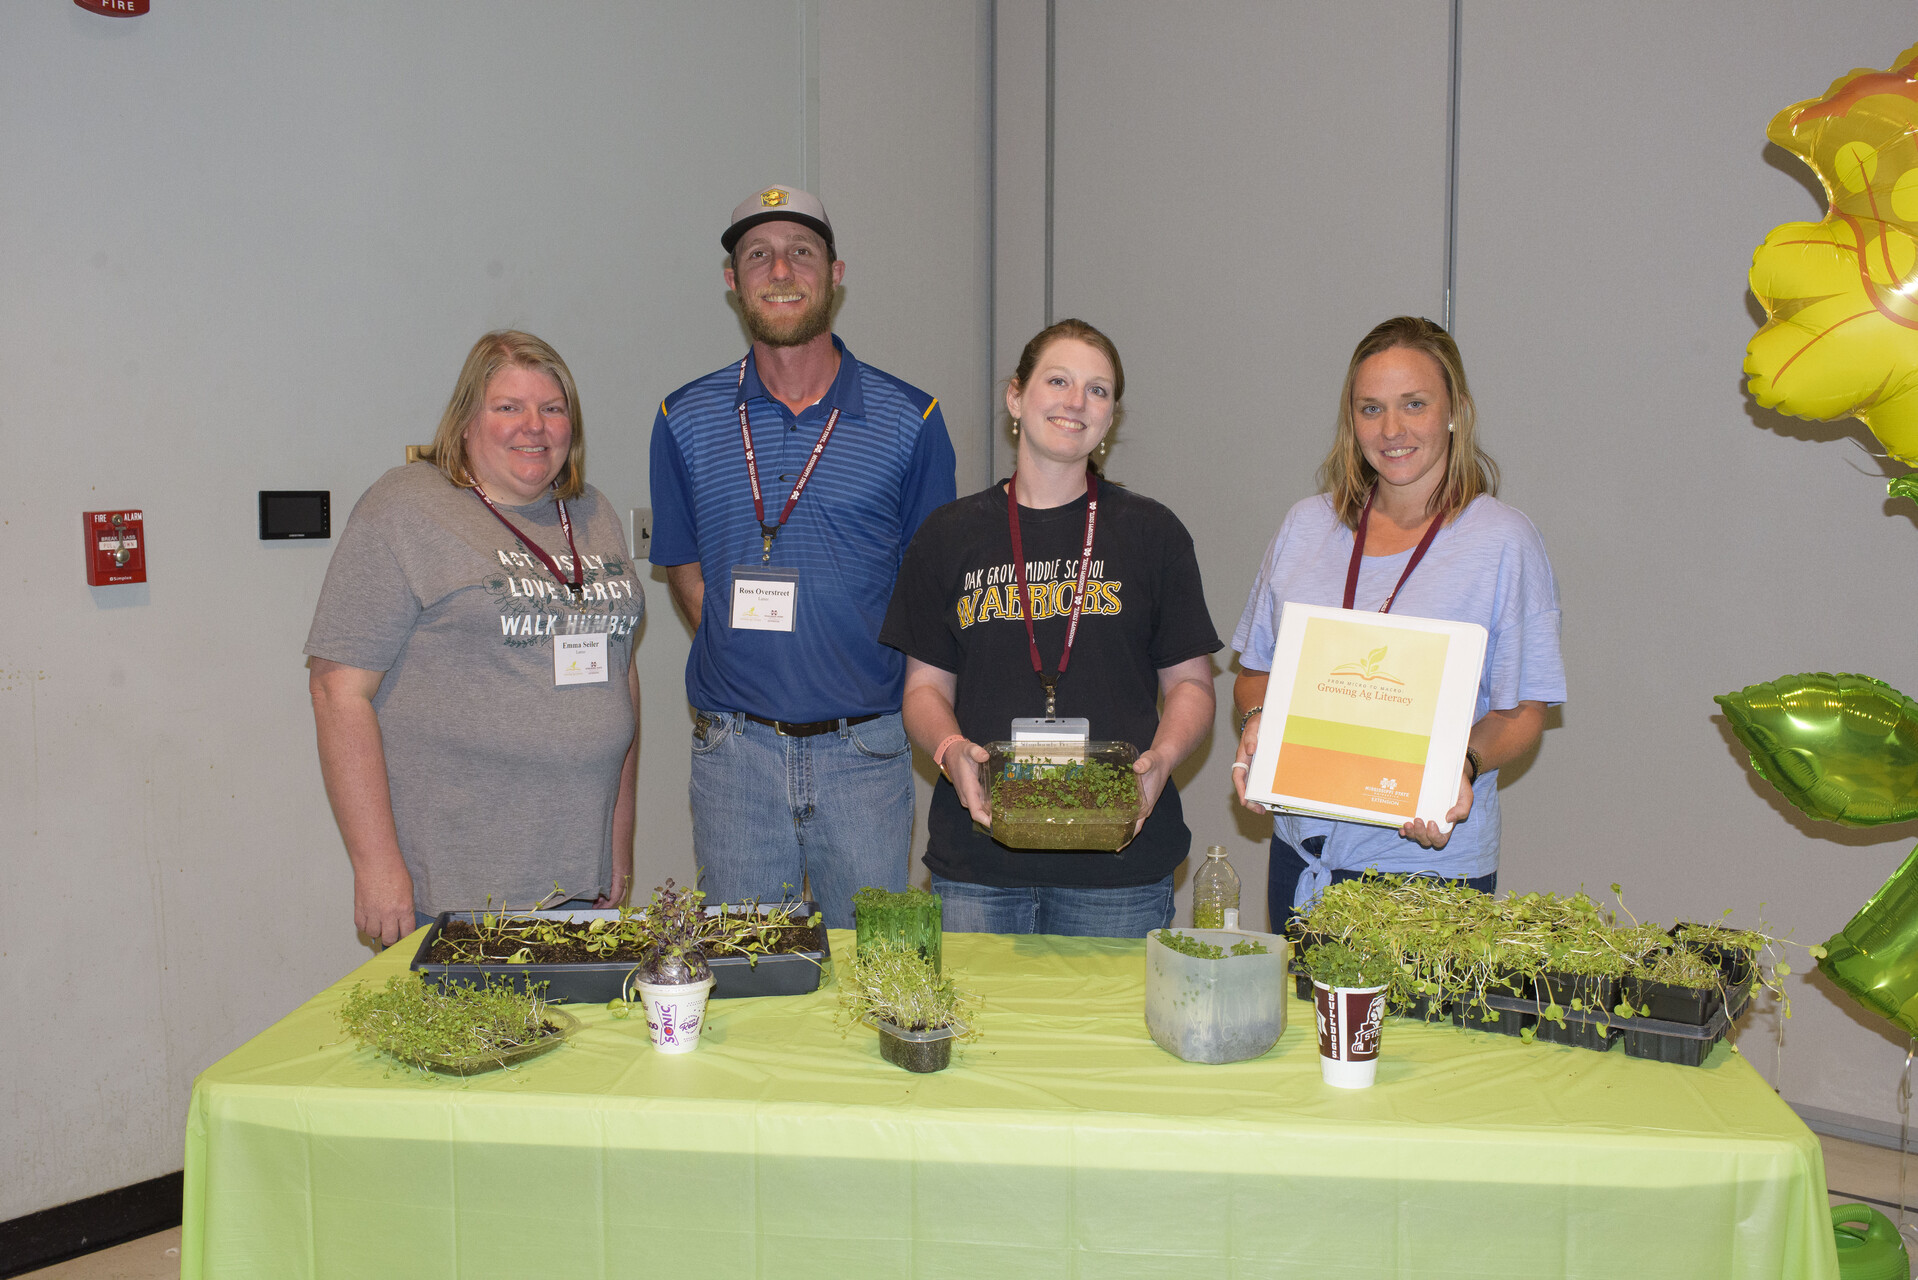 Three women and one man pose in front of a table filled with containers of microgreens